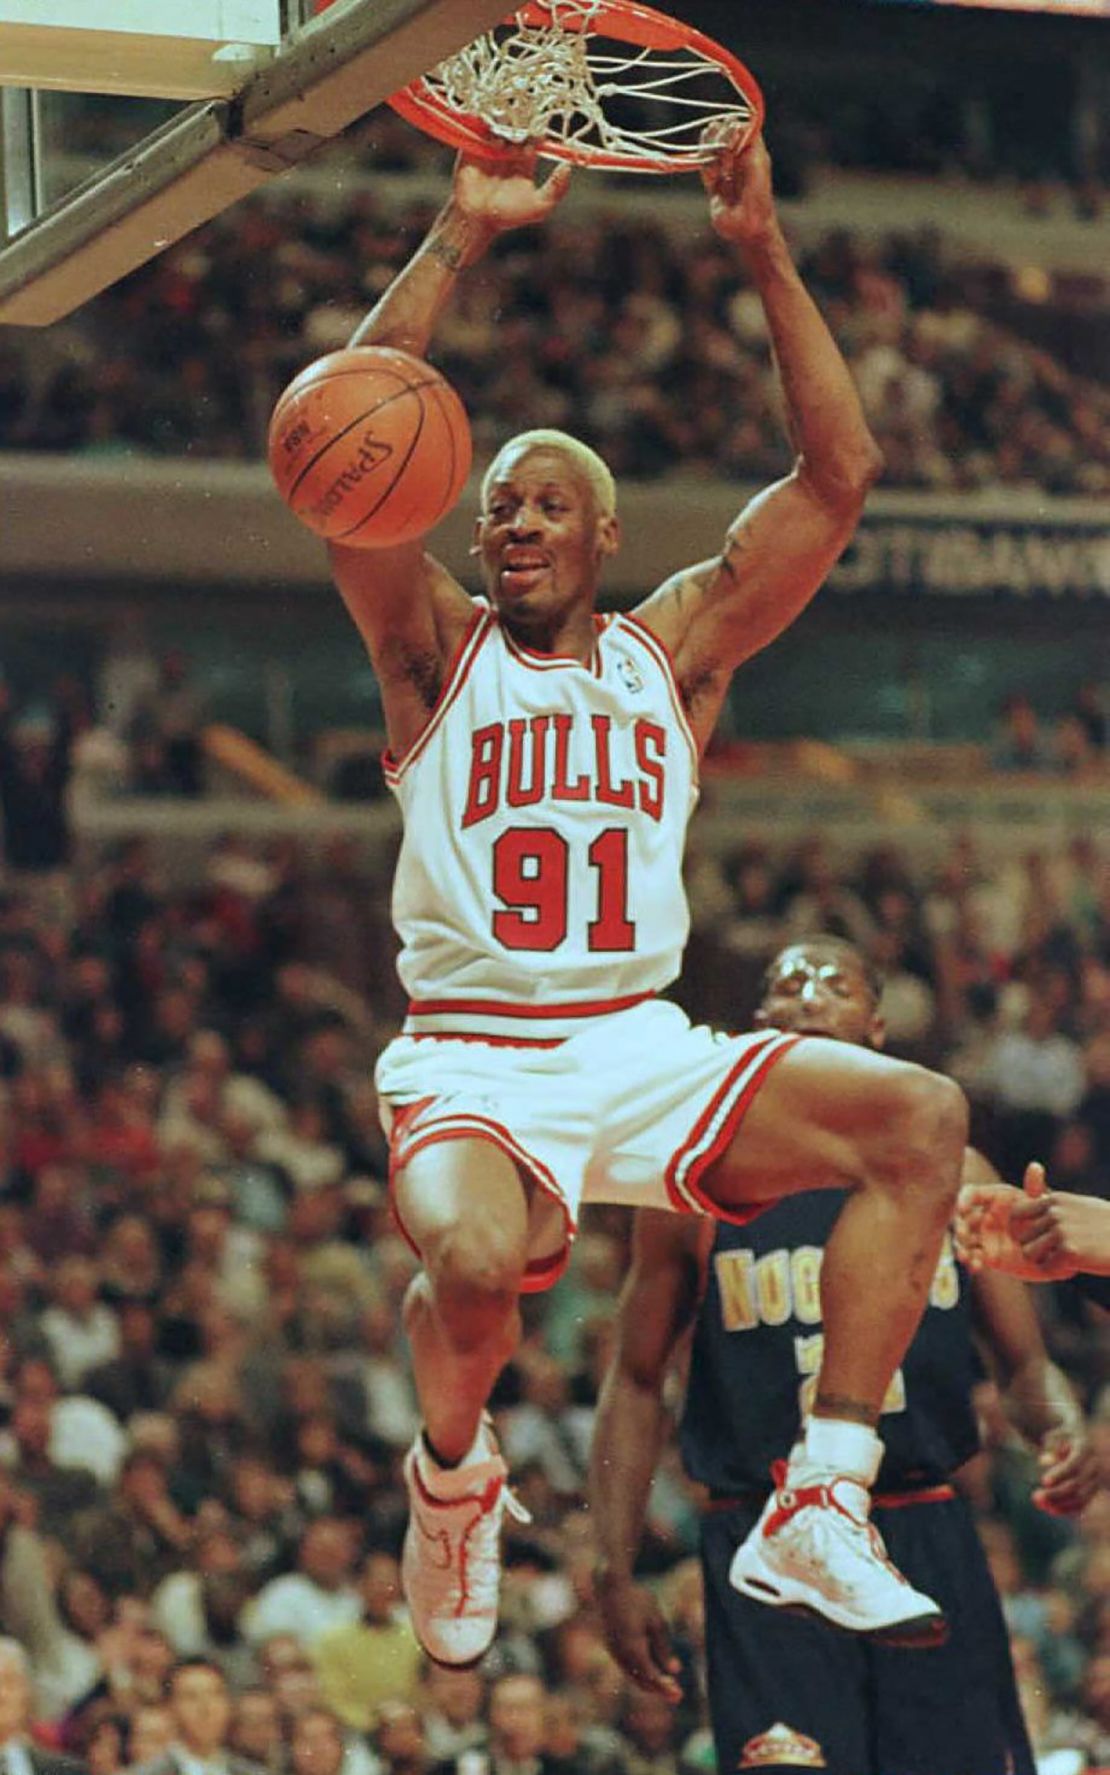 Dennis Rodman was a forward with the Chicago Bulls in the mid to late '90s.